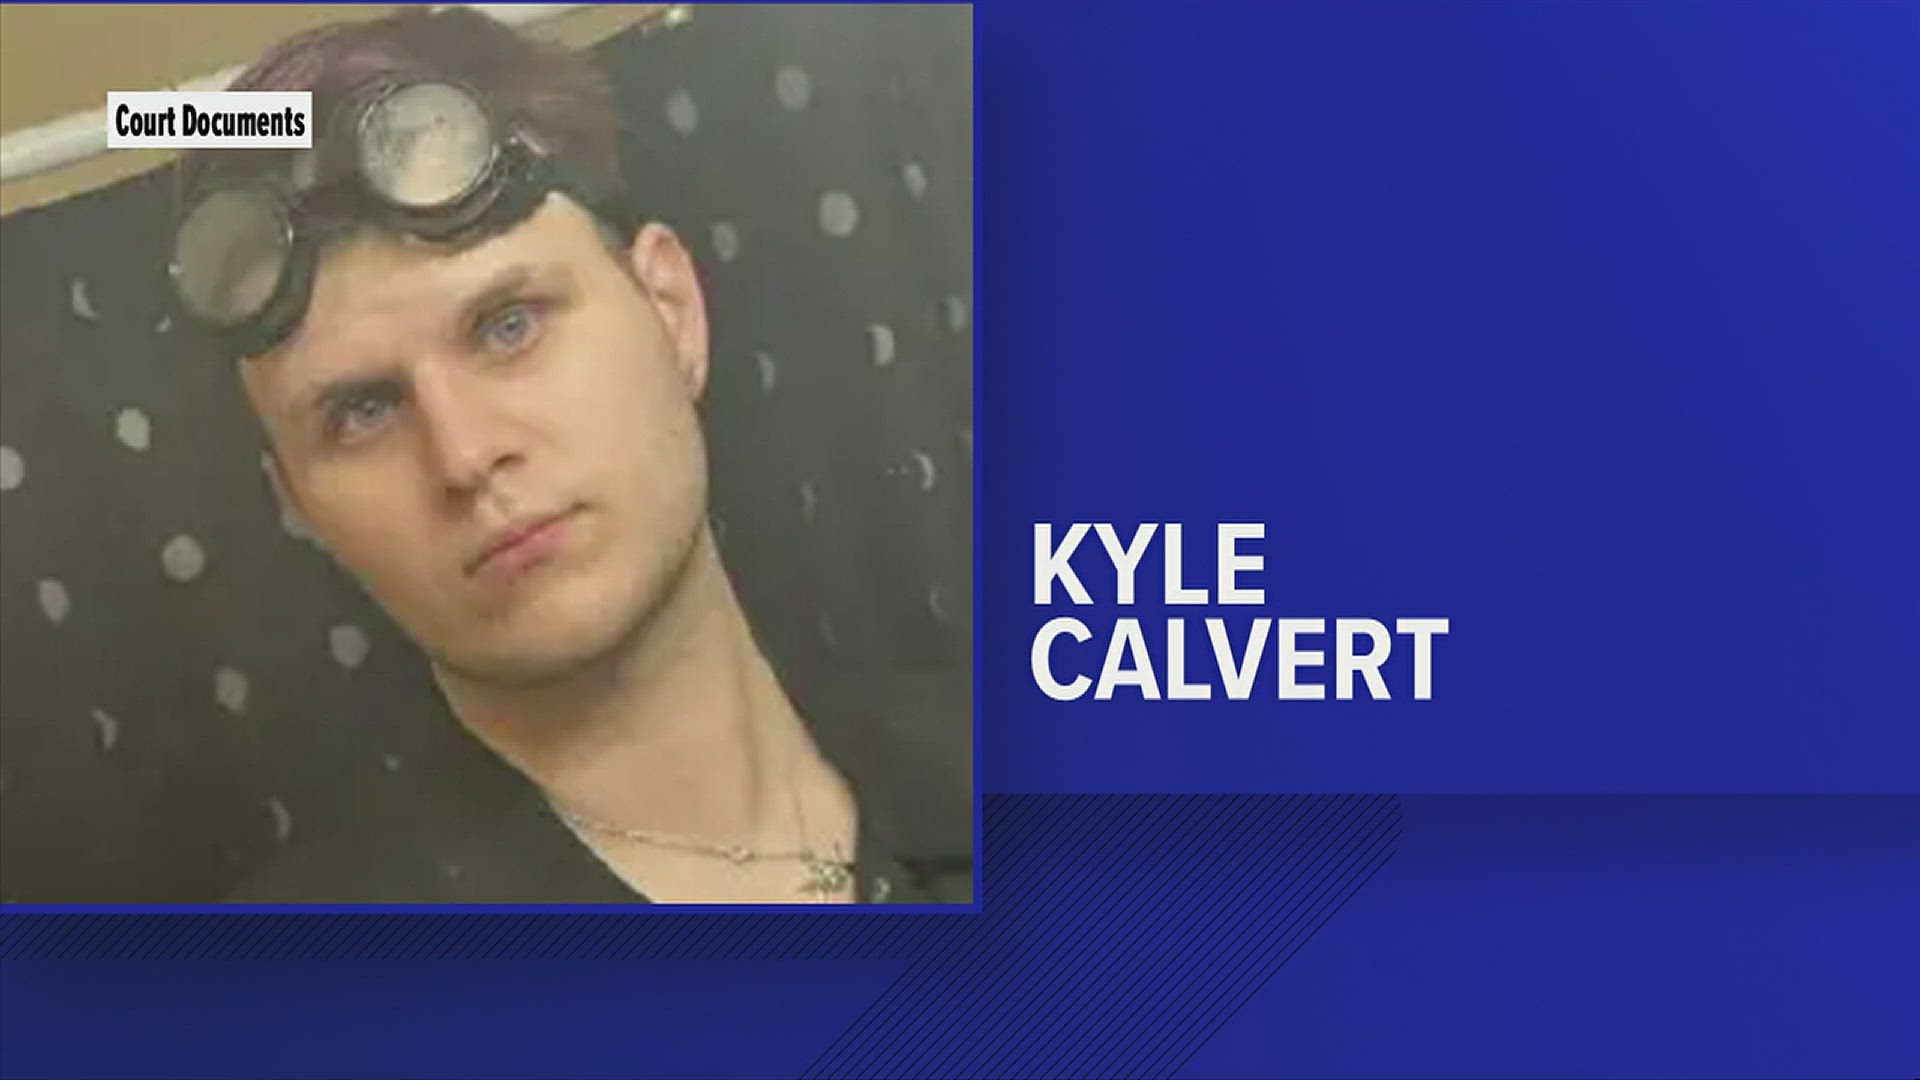 Kyle Calvert could face up to 20 years in prison.